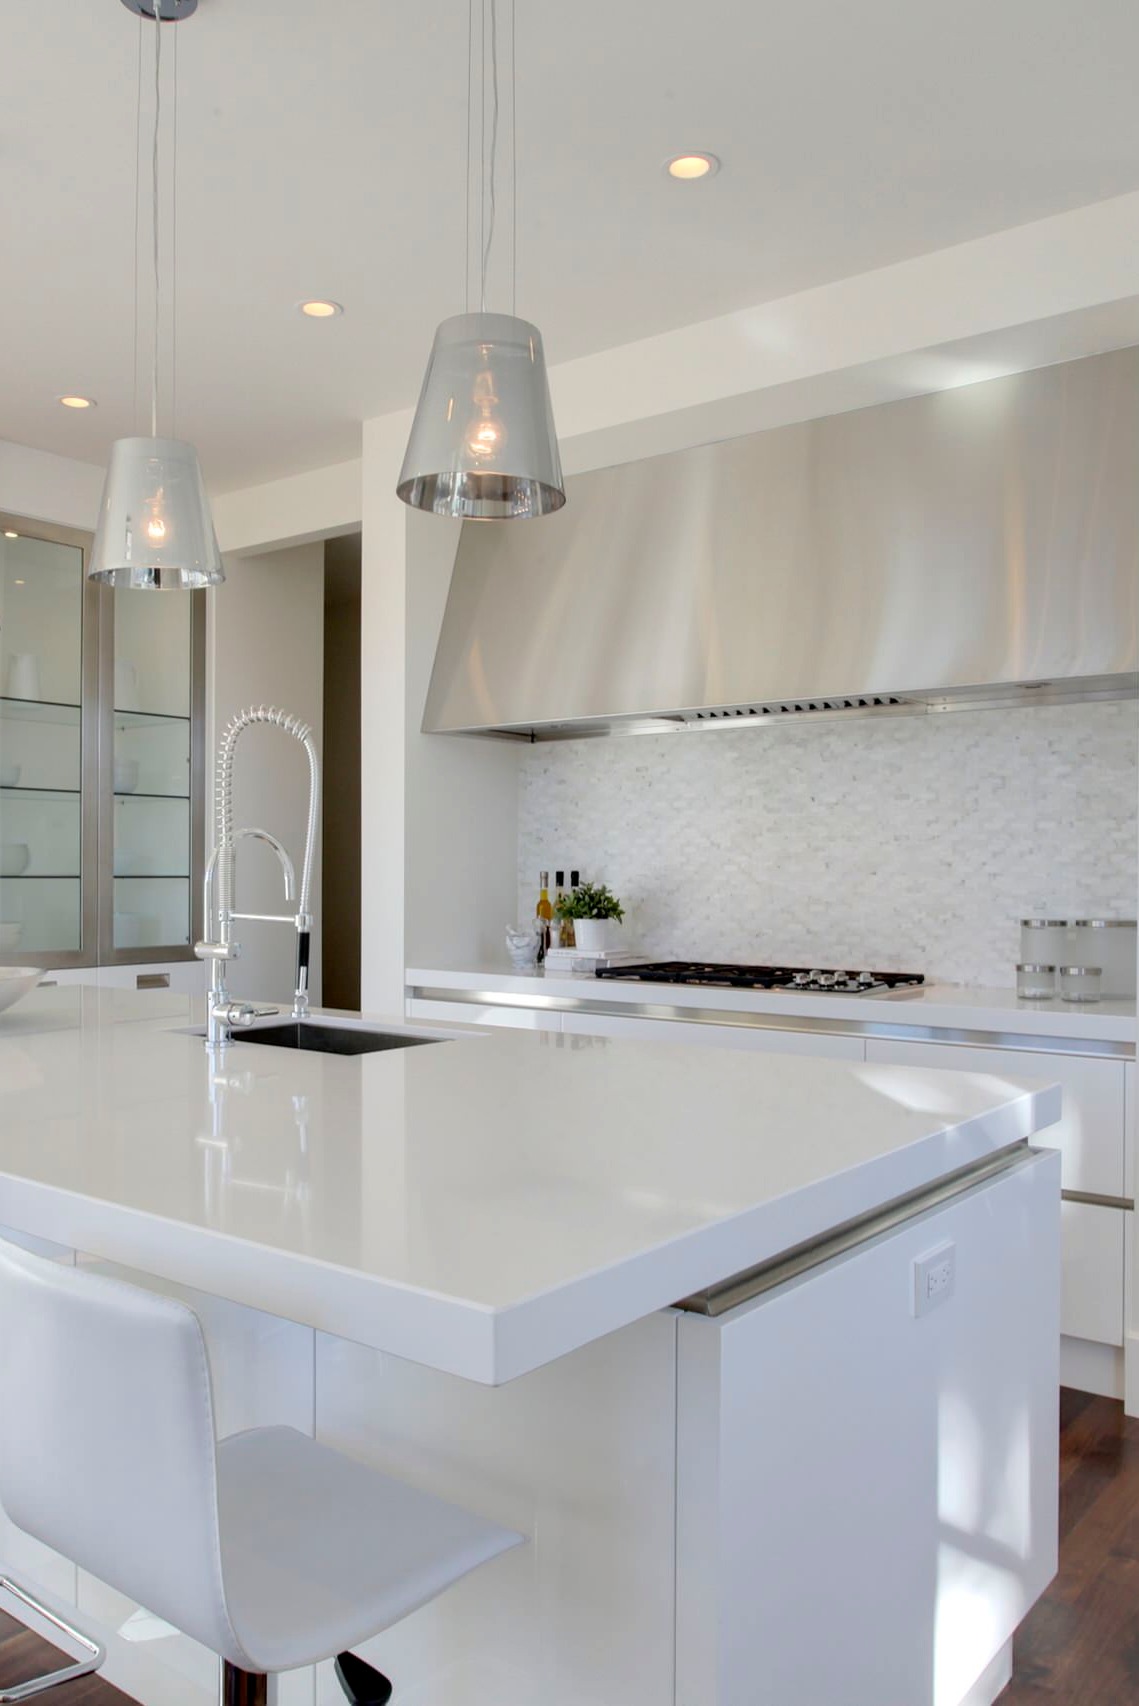 New White Kitchen Cabinets With Quartzite Countertops for Large Space